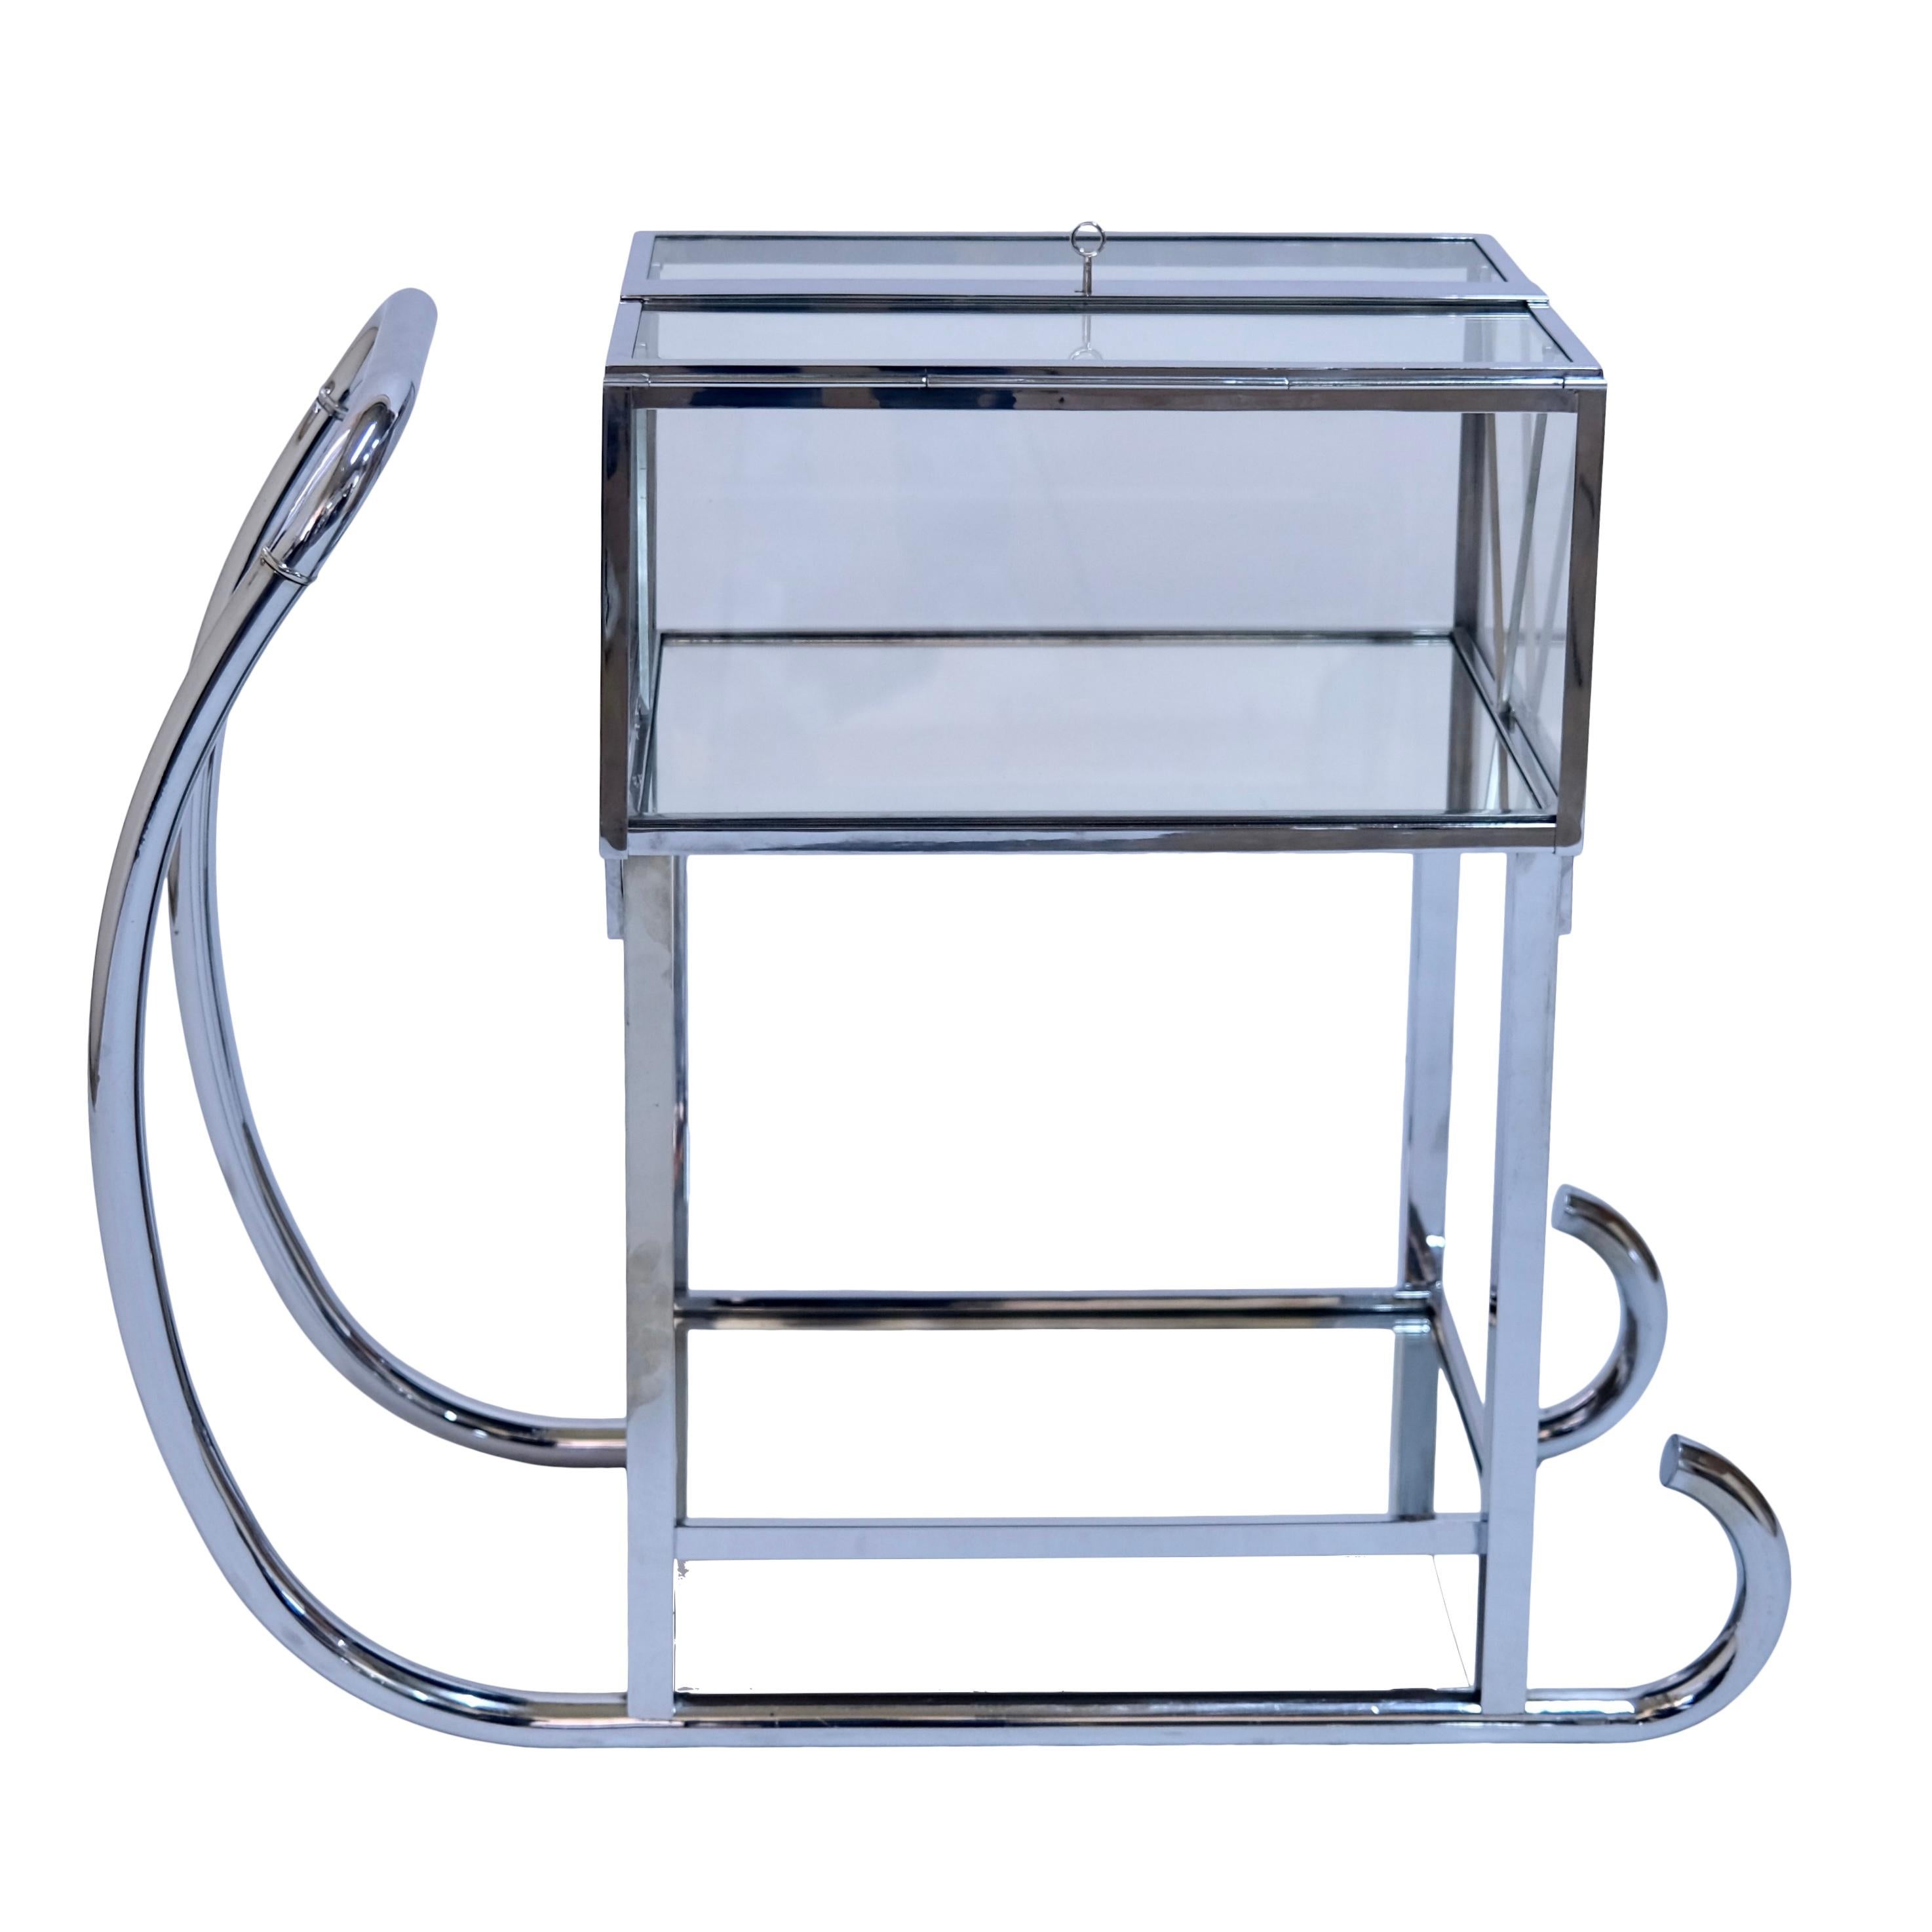 Bar furniture in the form of a sledge by René Herbst. 
Glass box lowers when opened.
Original chrome plating

Original Art Deco, France 1930s

Dimensions:
Width: 90 cm
Height: 87 cm
Depth: 36 cm.